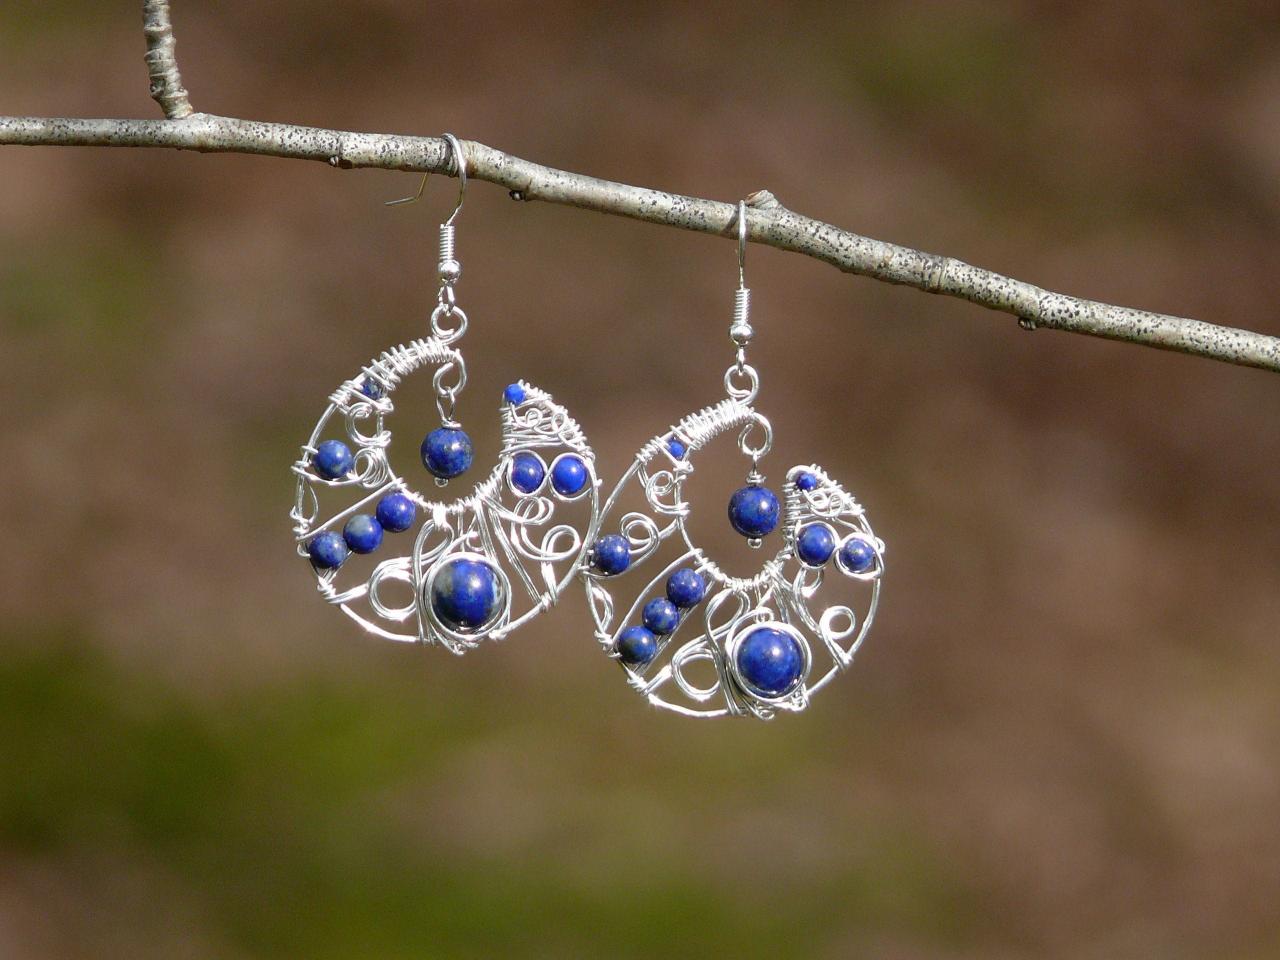 Wire Wrapped Blue Lapis Lazuli Moon Shaped Earrings, Crescent Moon Blue Boho Earrings With Gemstone, Blue Crystal Wire Wrapping Dangles